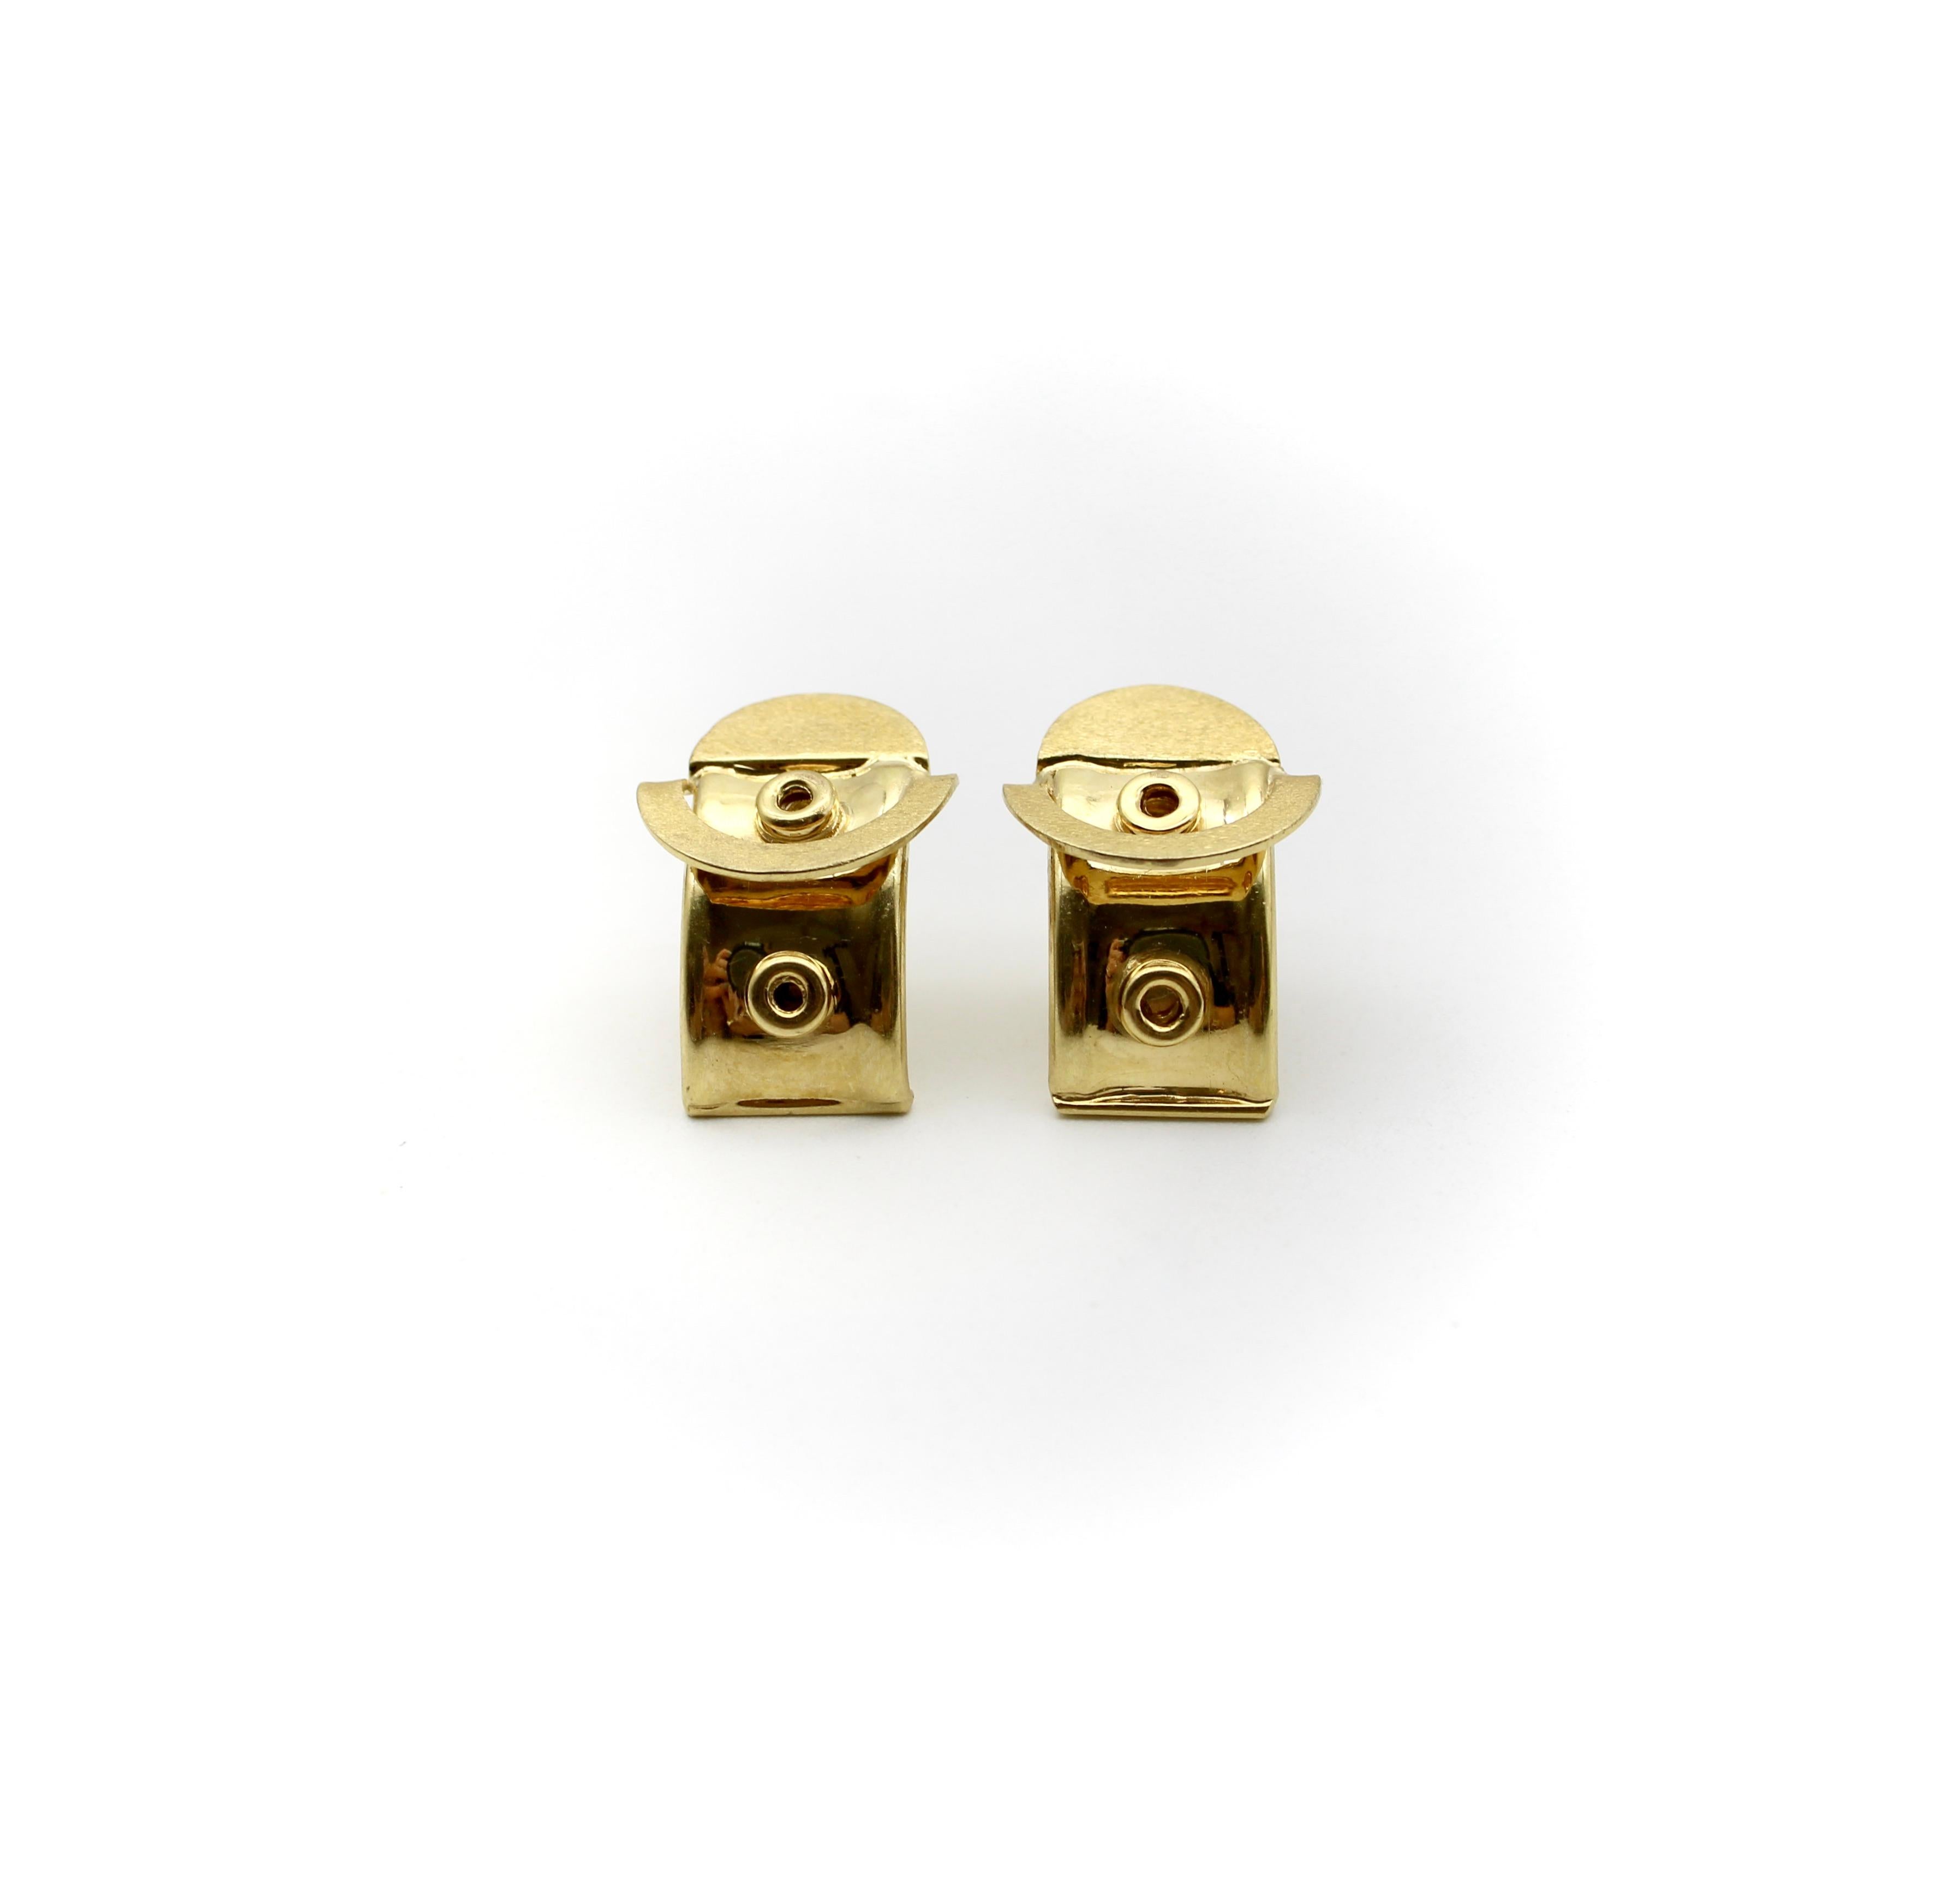 These 18k gold earrings appear to be “buckled” into your earlobe. A circle at the top of the earring alludes to a buckle that curves and flows under the ears in huggie fashion. The gold has both shiny and matte surfaces, with raised circular